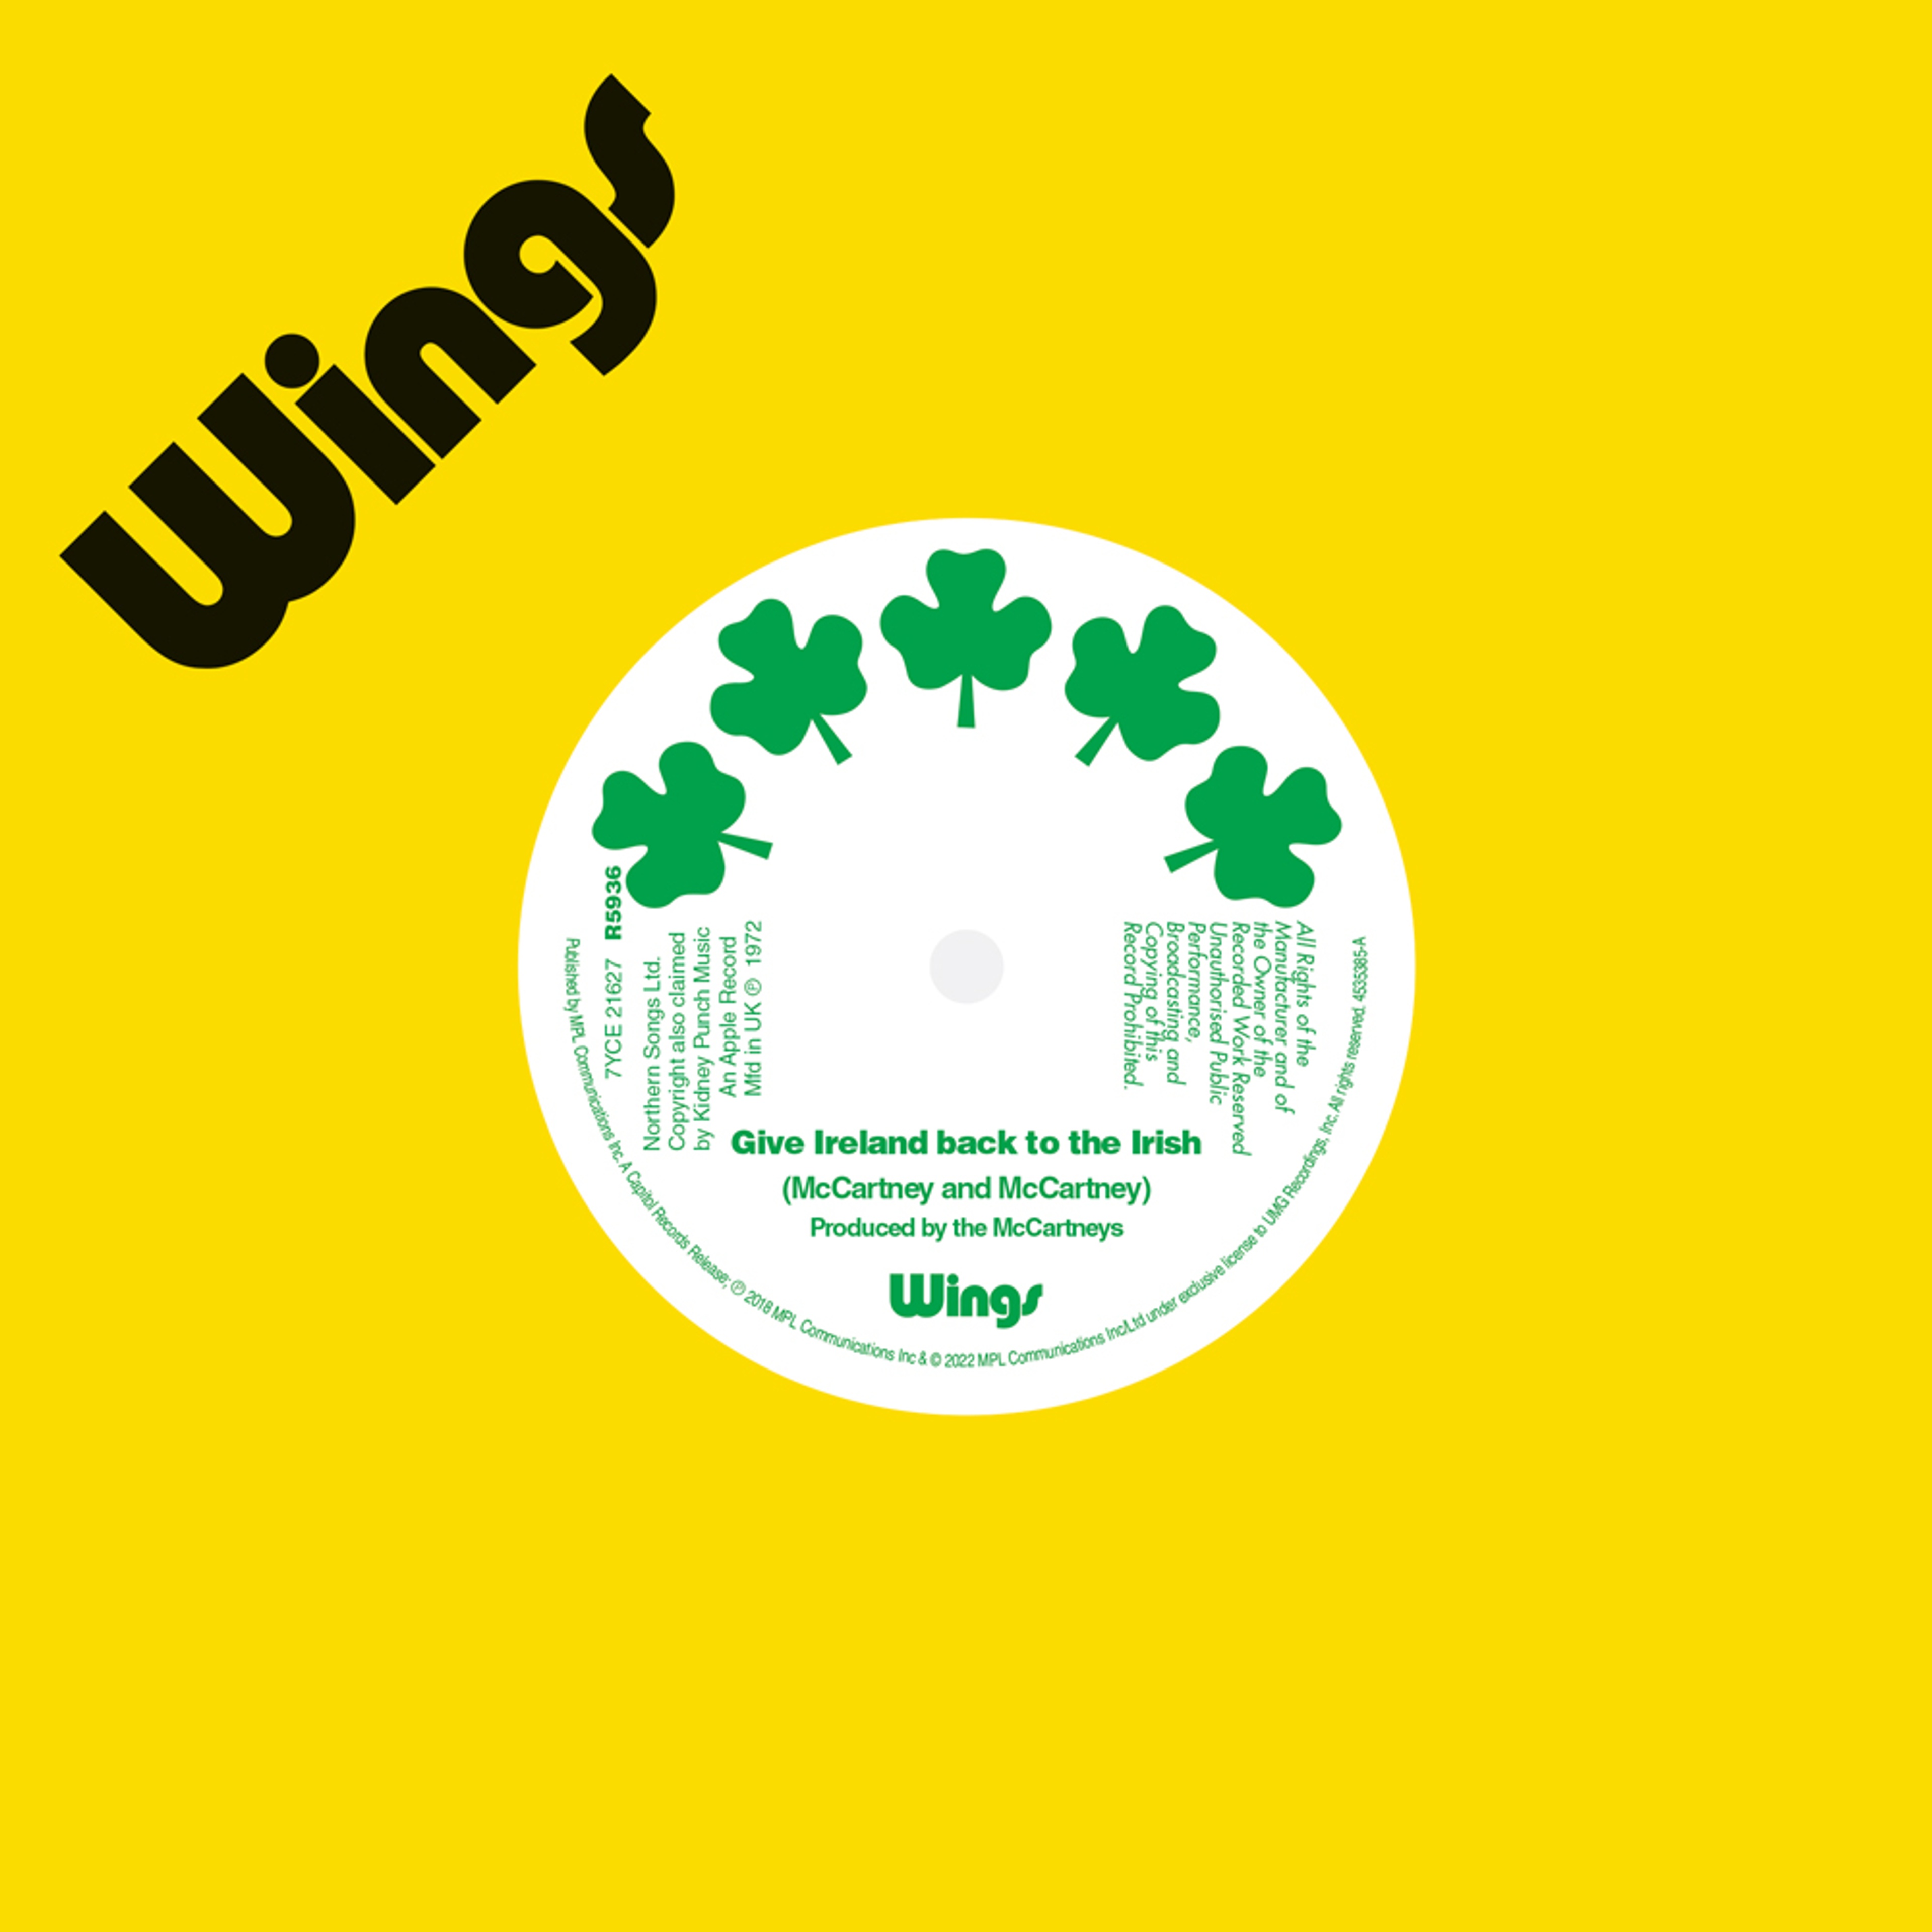 “Give Ireland Back To The Irish” Single artwork as featured in 'The 7" Singles Box'